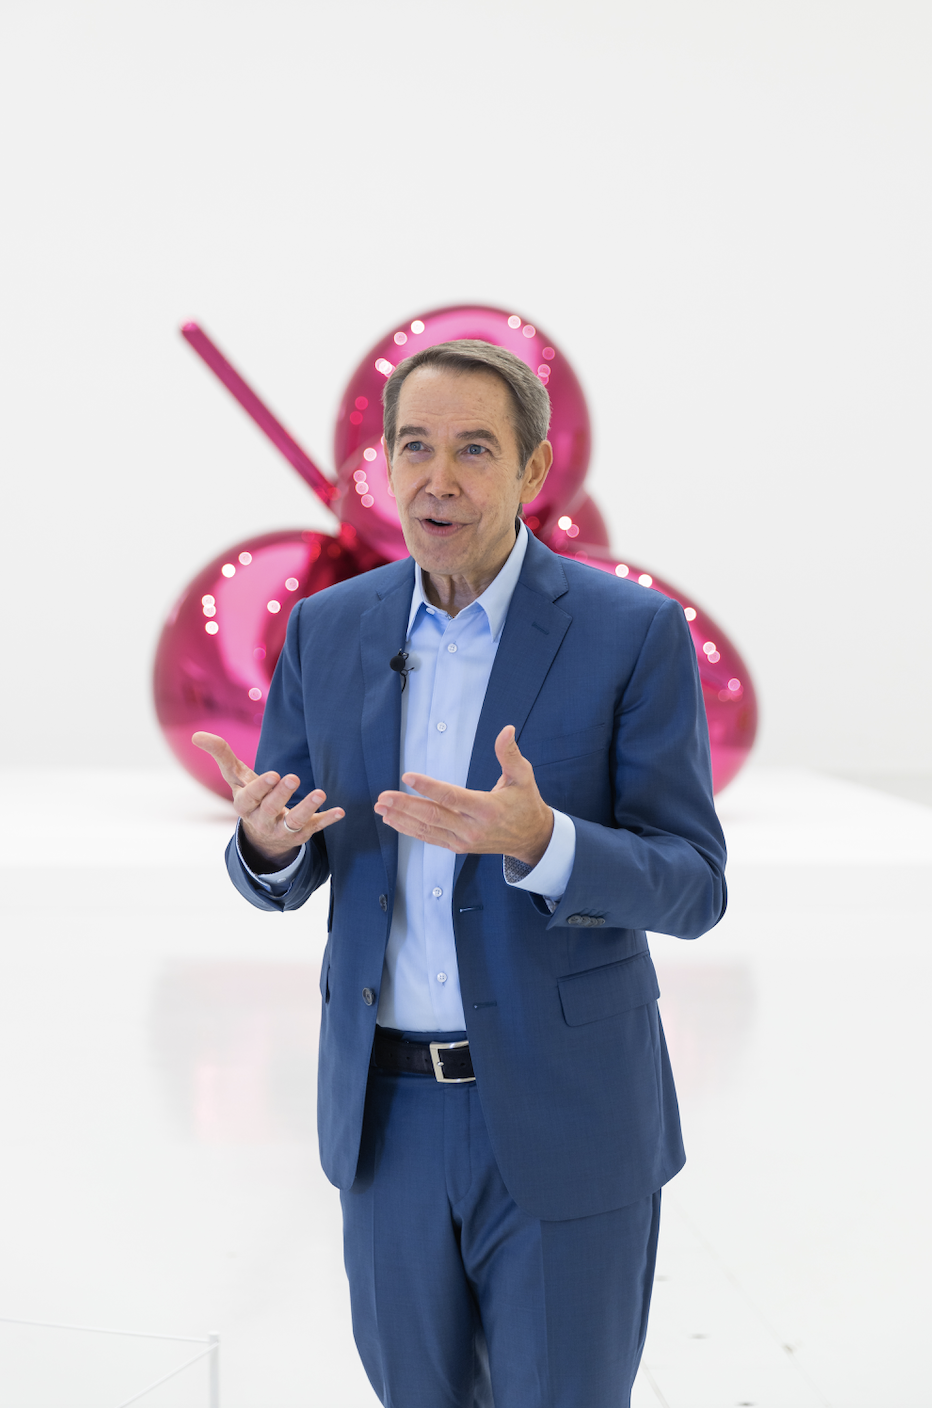 Artist Jeff Koons gives a talk about his exhibition in Doha wearing a blue suit, standing in front of a tall pink sculpture.